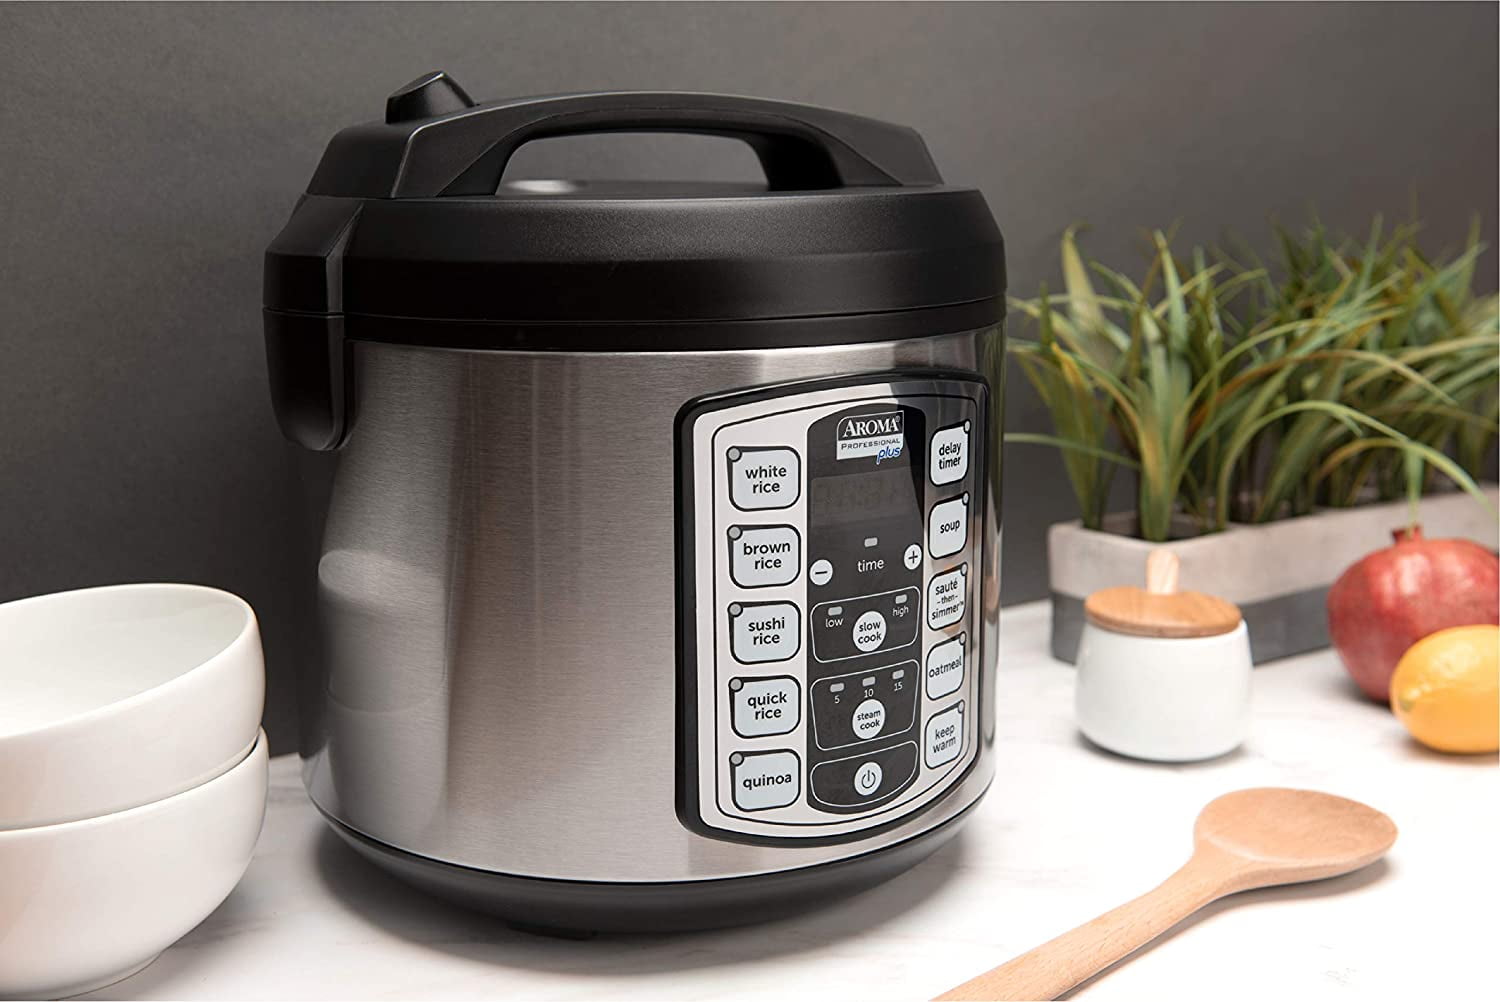 Aroma Housewares ARC-5000SB Digital Rice, Food Steamer, Slow, Grain Cooker,  Stainless Exterior/Nonstick Pot, 10-cup uncooked/20-cup cooked/4QT